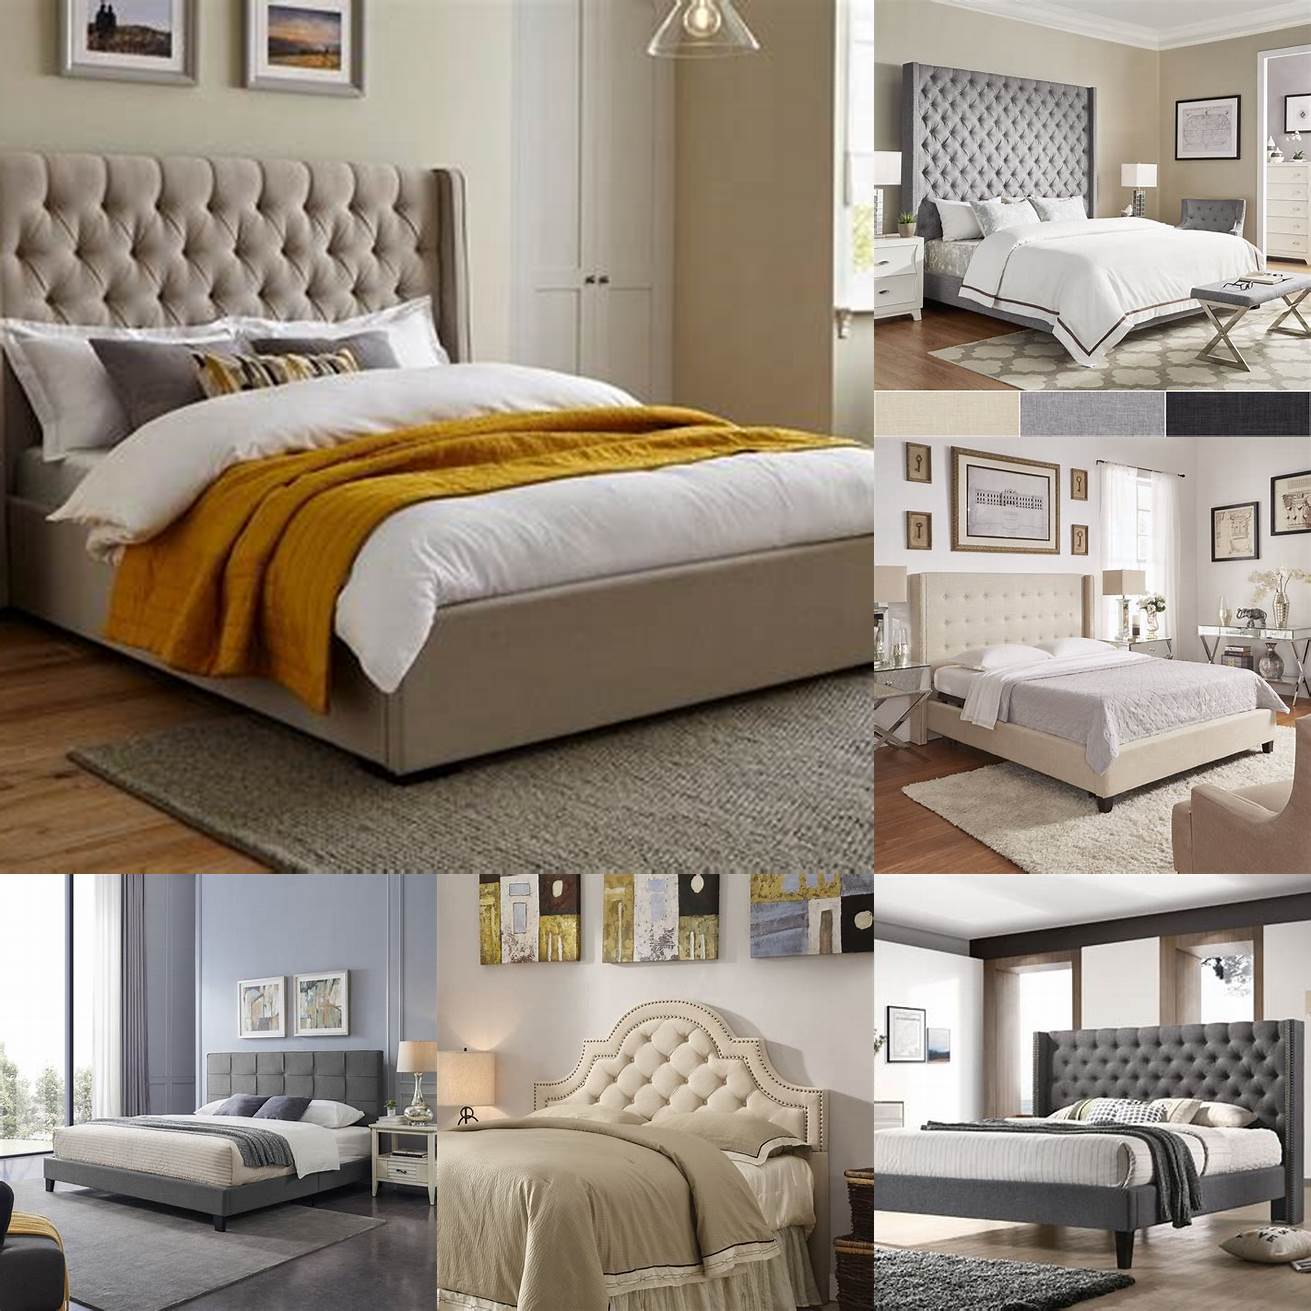 Style - Upholstered beds are available in a wide range of styles and materials so you can choose one that complements your bedroom decor